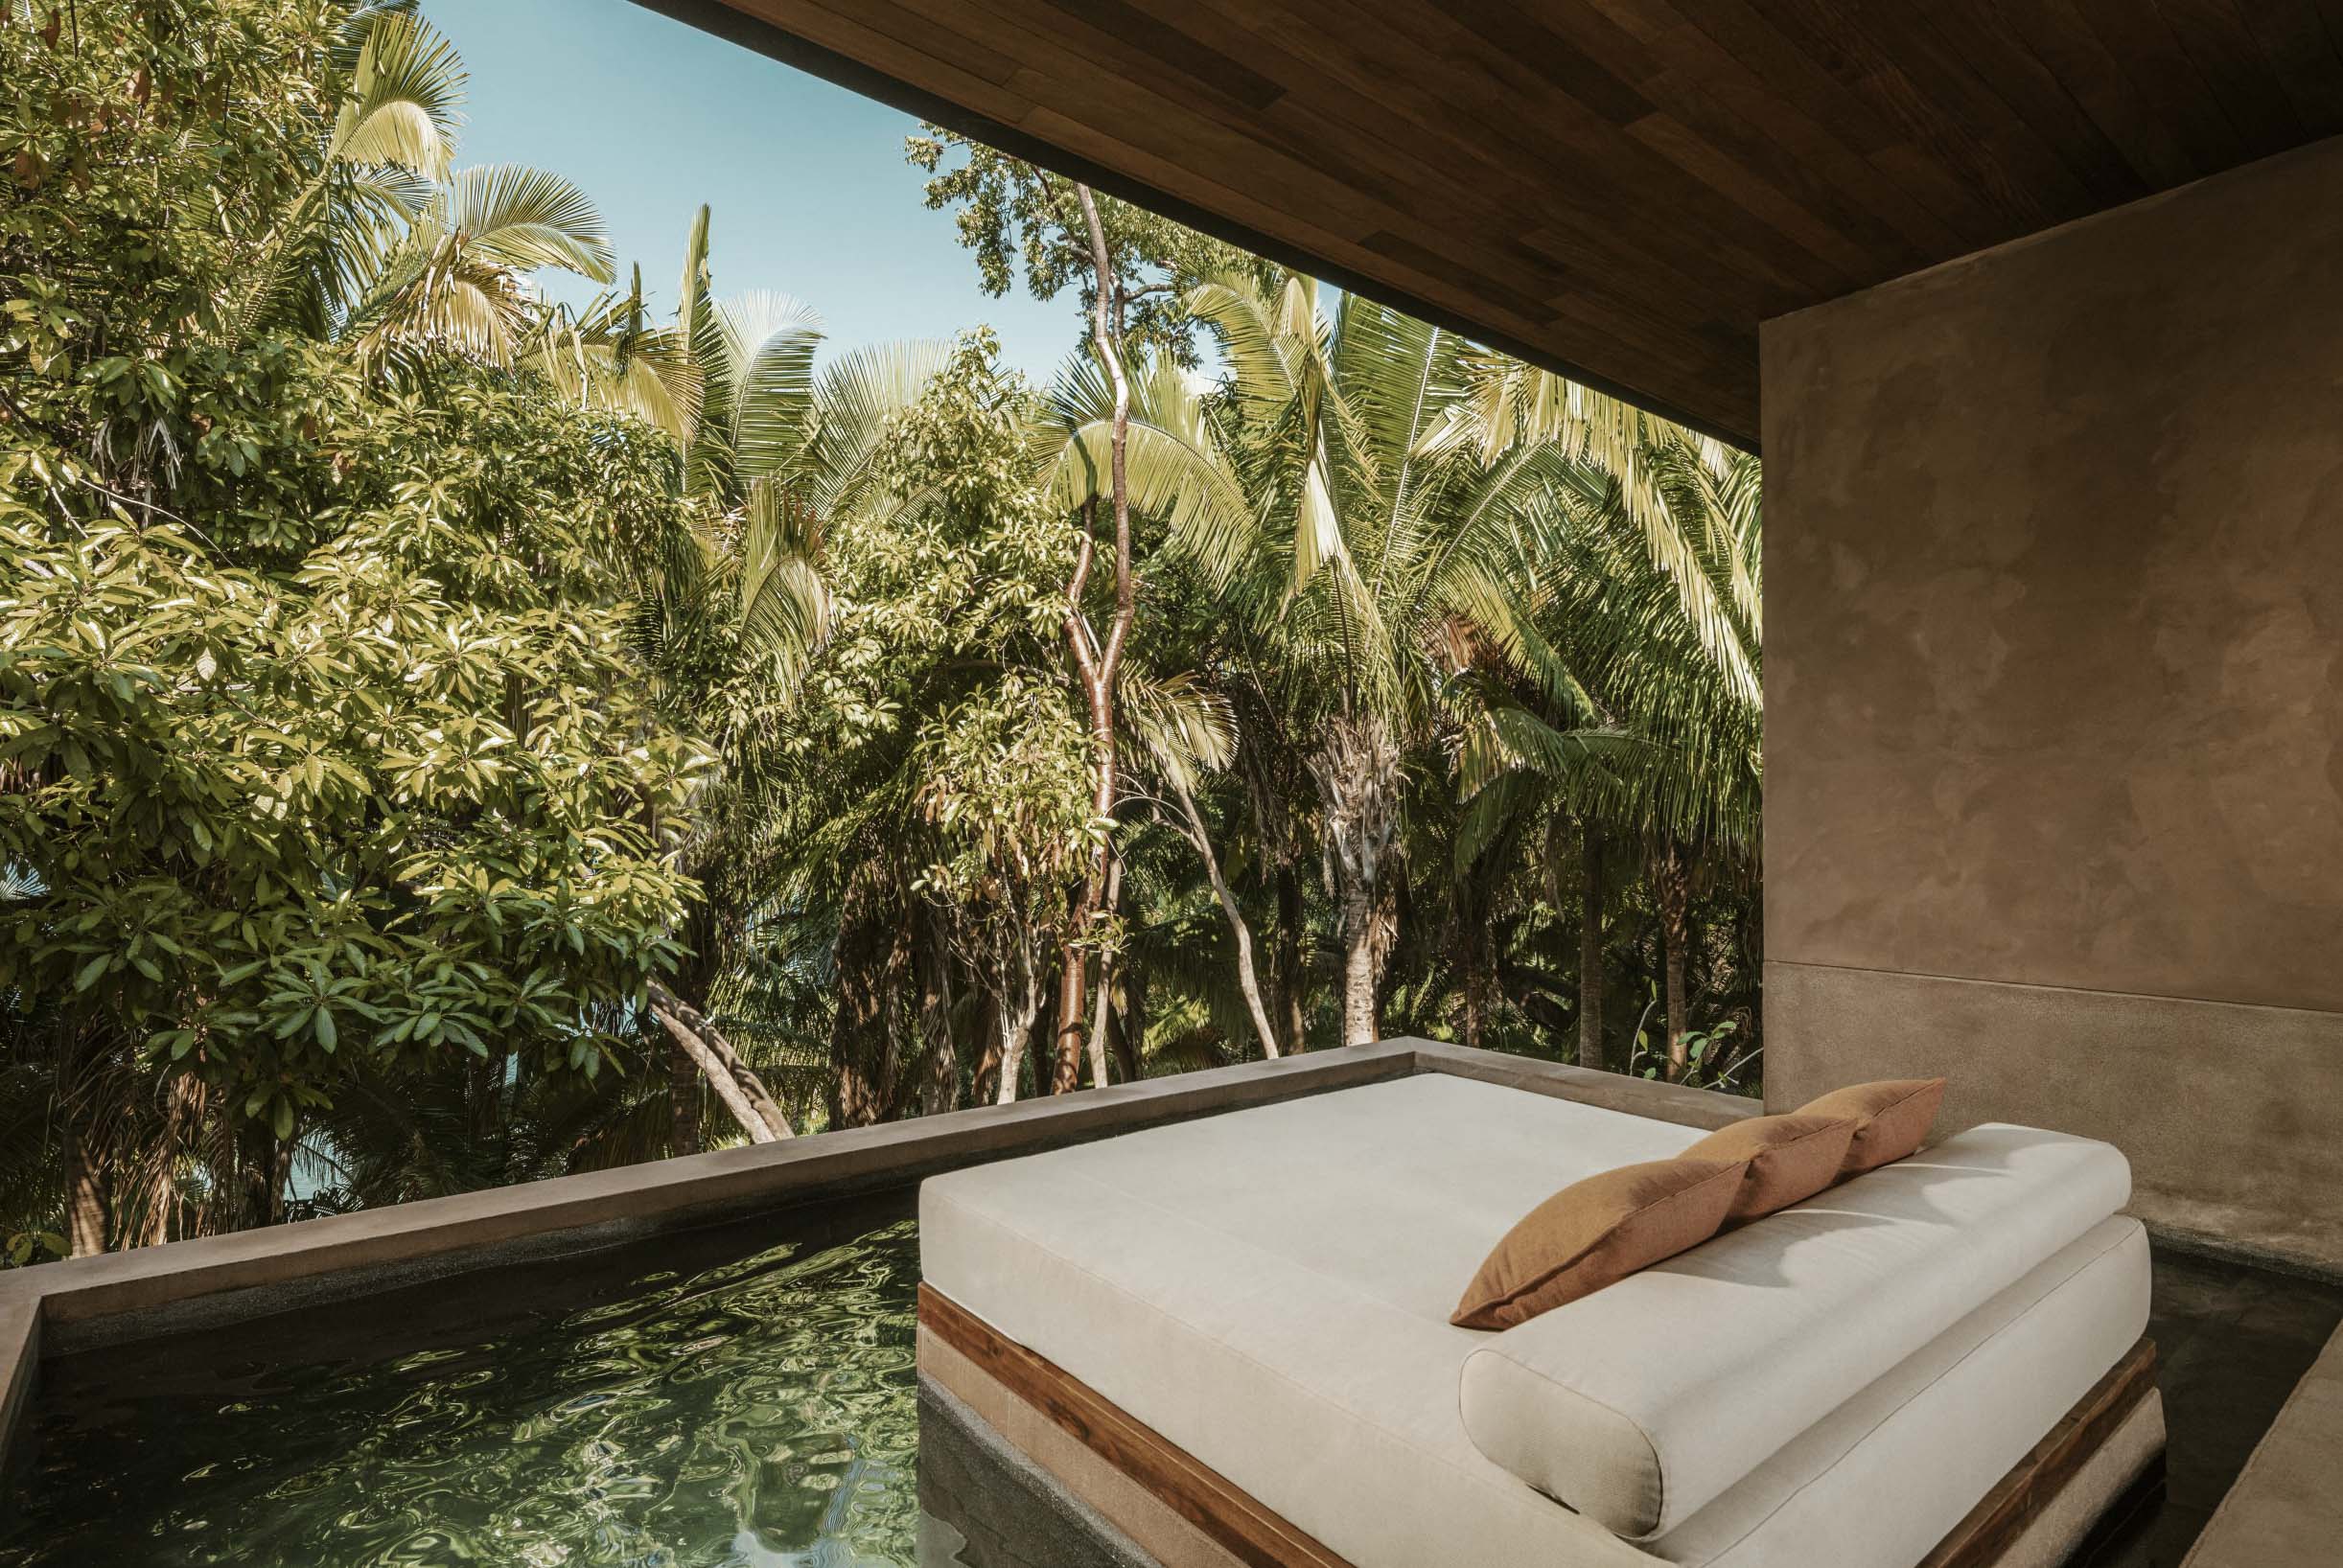 Spa & Romance in the Jungle: The One&Only Mandarina Resort Spa